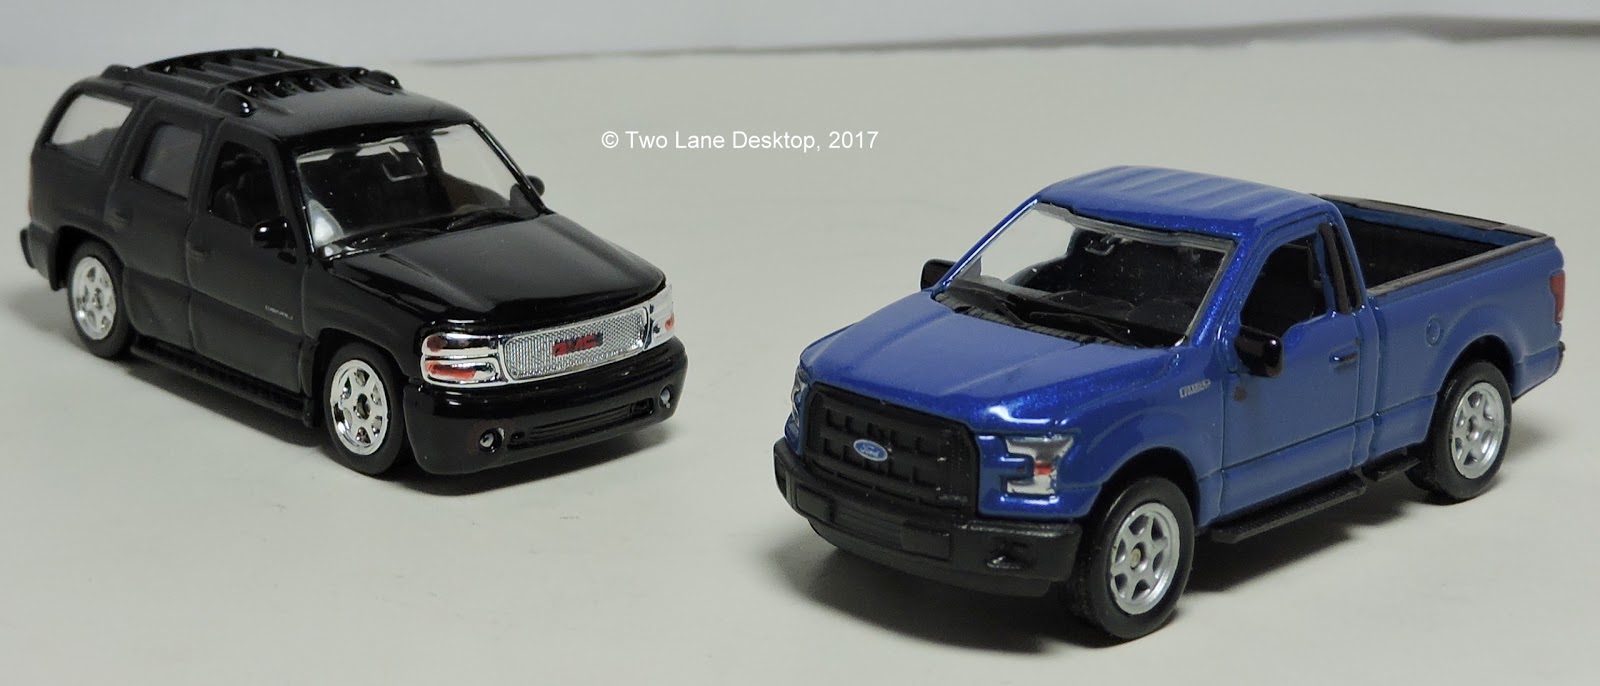 1:64 26” Denali Wheel/Tire Set Up Truck Not Included.